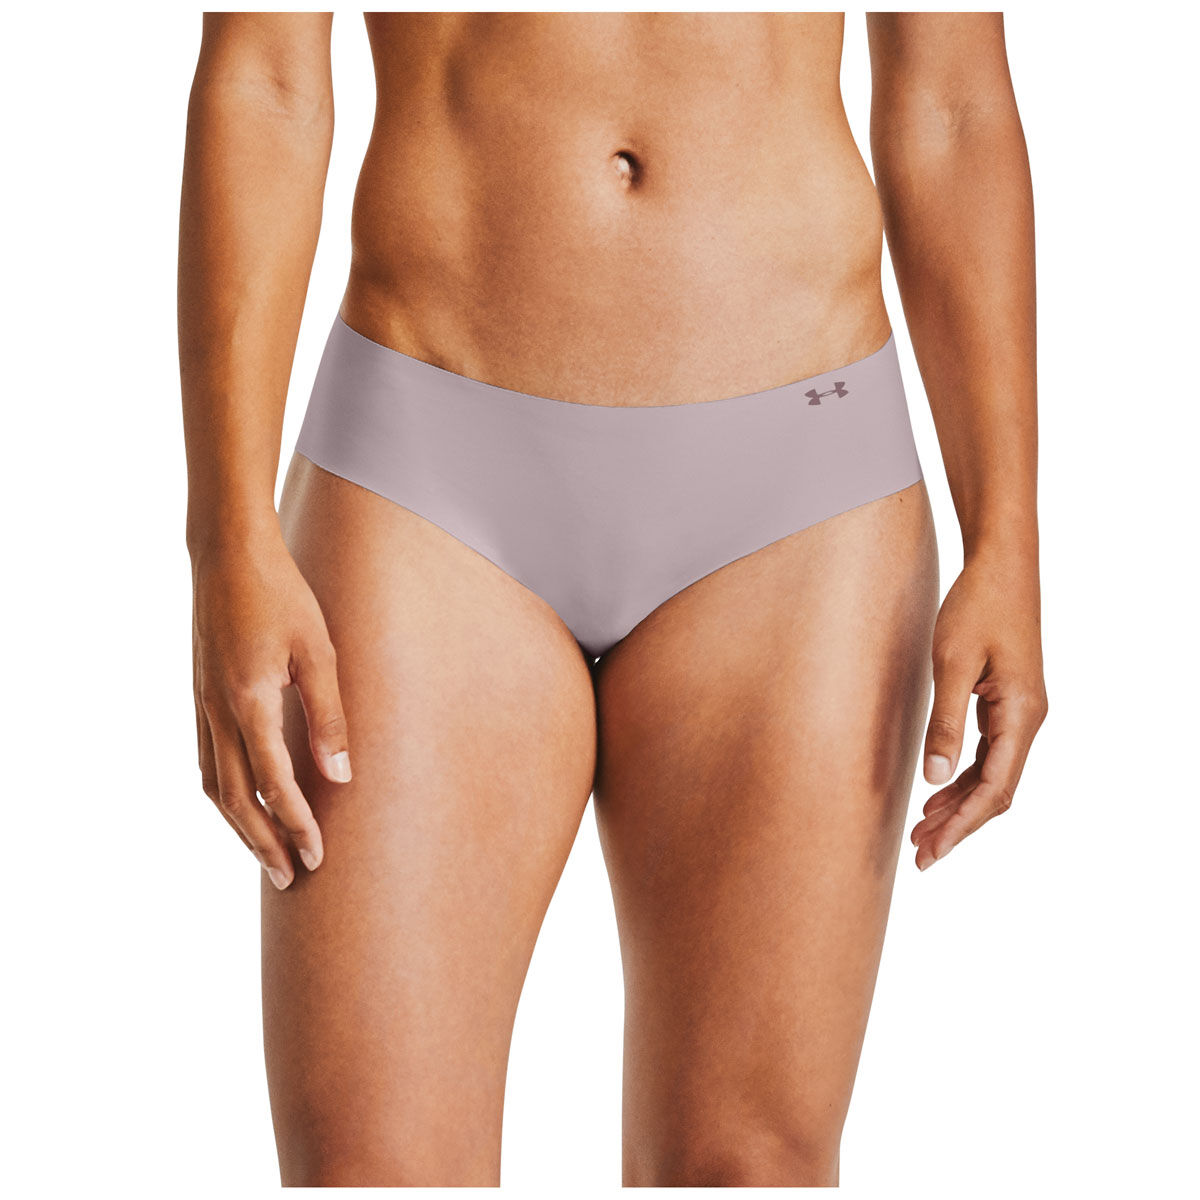 New Balance Women's Breathable Hipster Panty 3-Pack, Stretchable